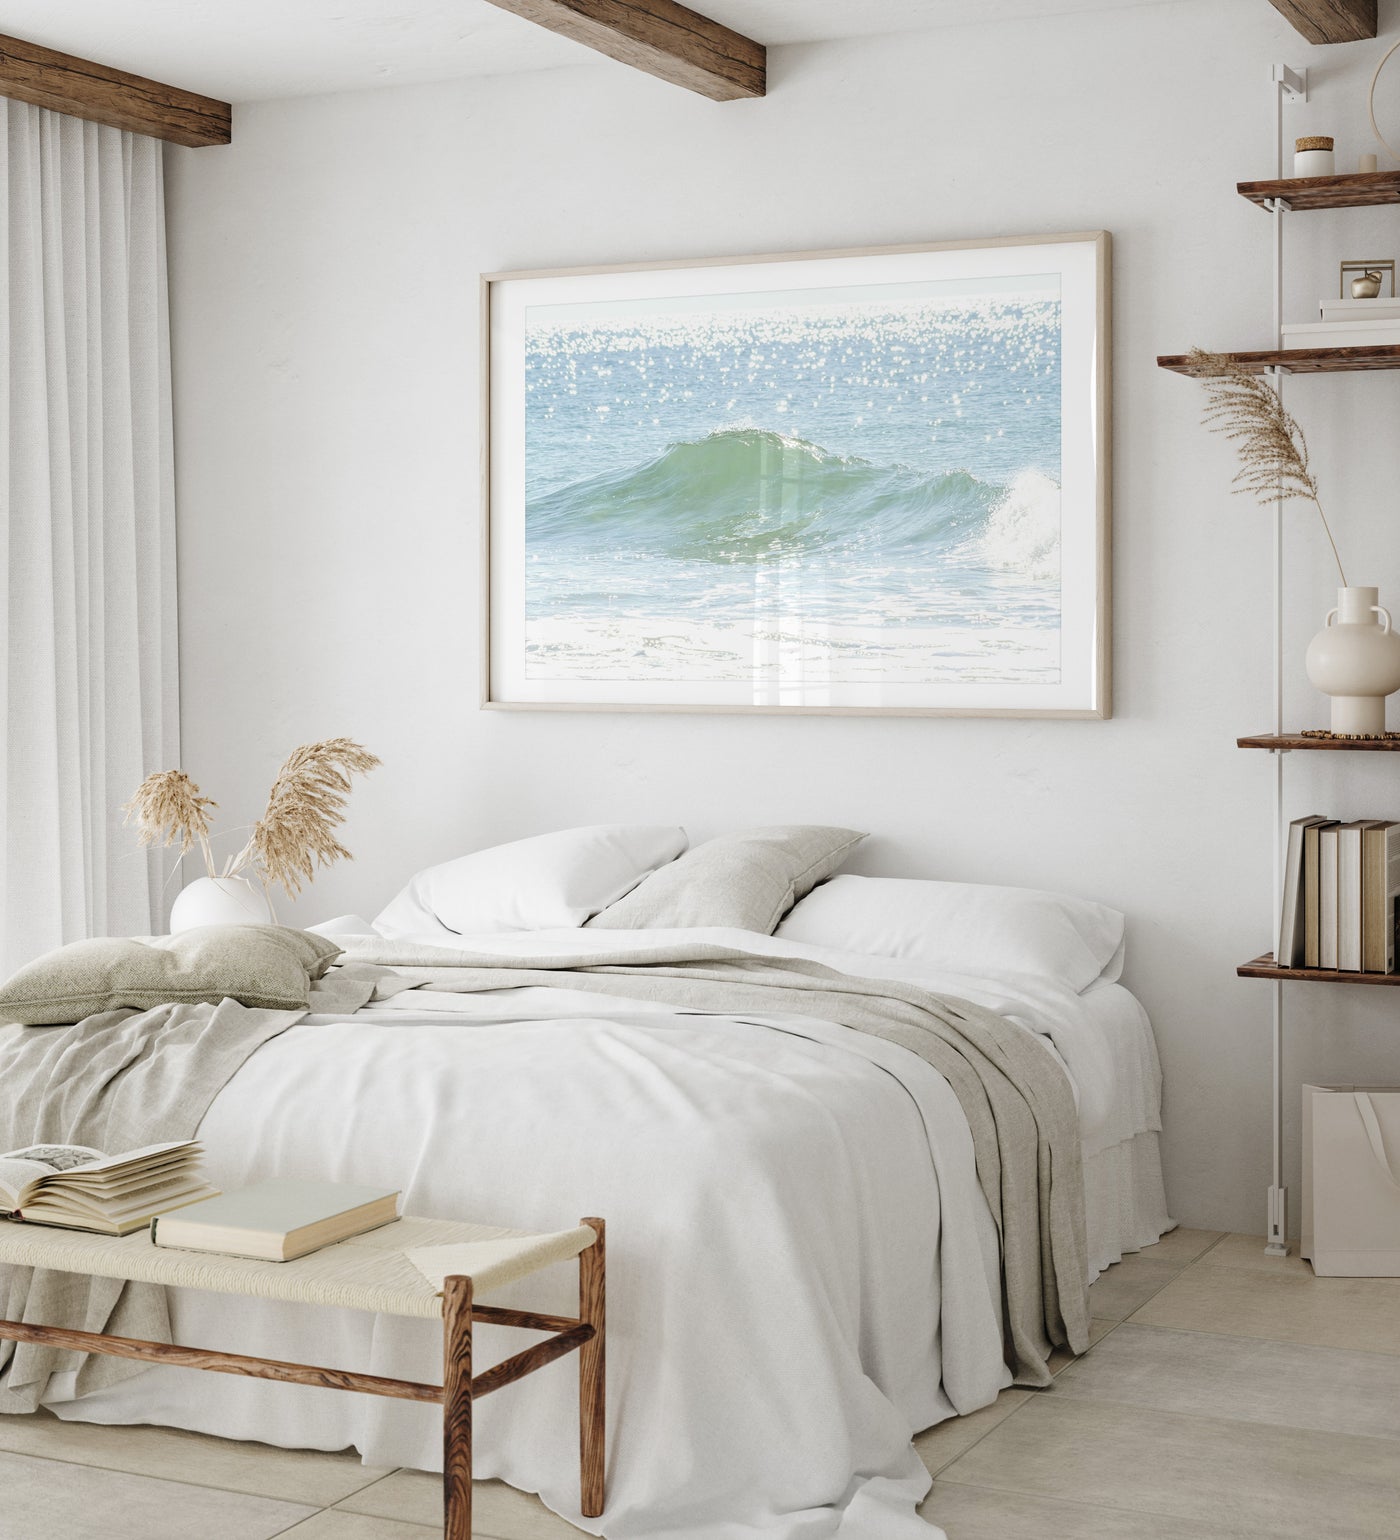 Large ocean wave print by Cattie Coyle Photography in bedroom